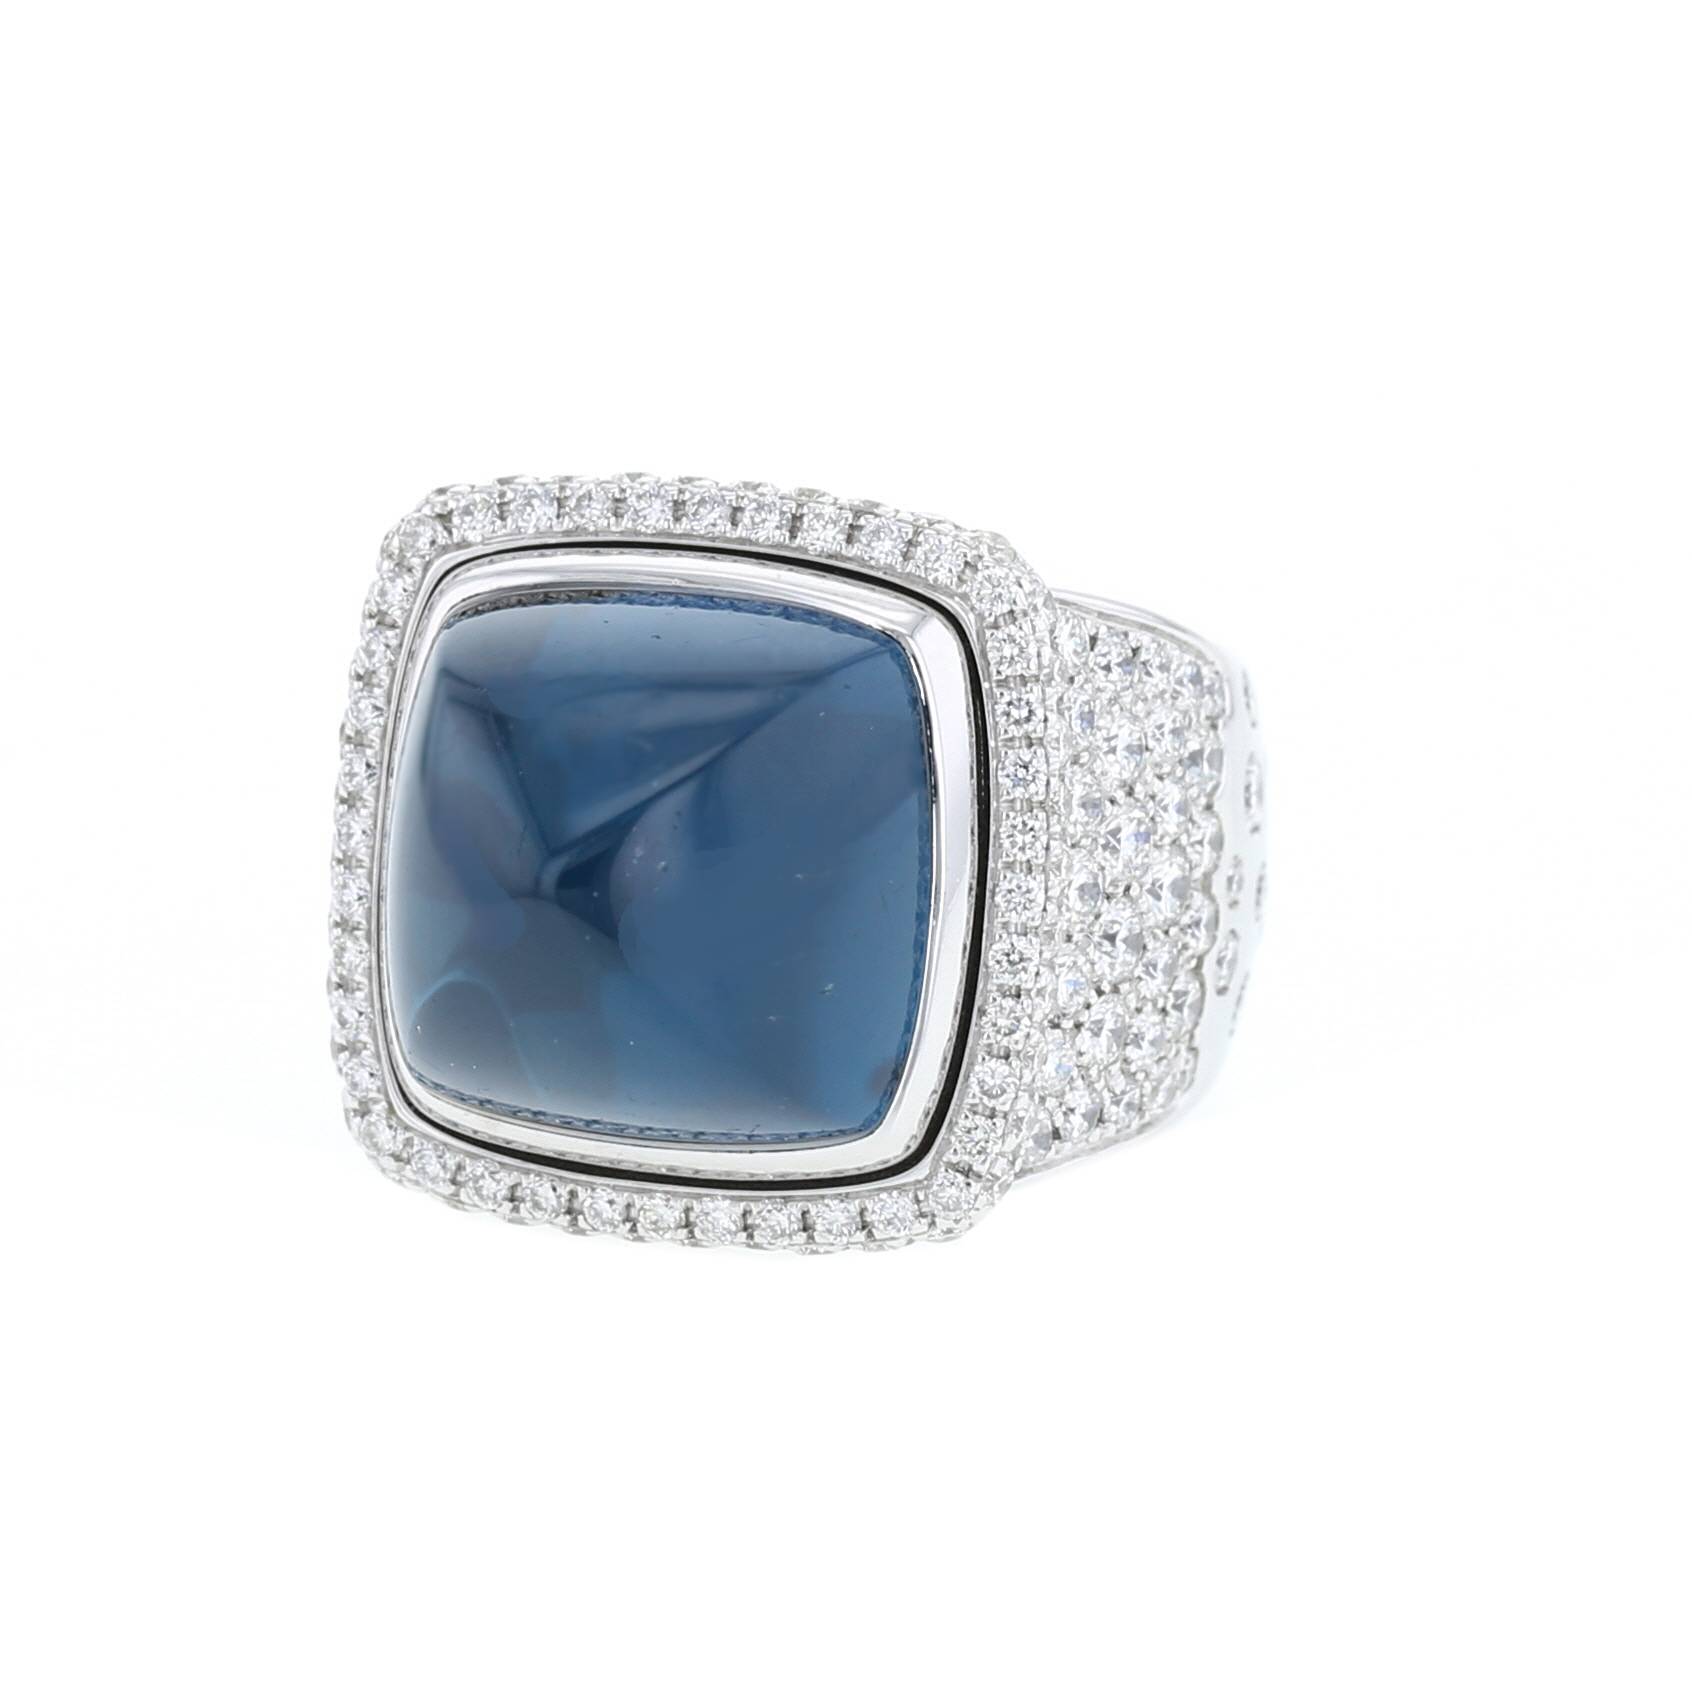 Fred Pain de Sucre large model ring in white gold, diamonds and topaz - 00pp